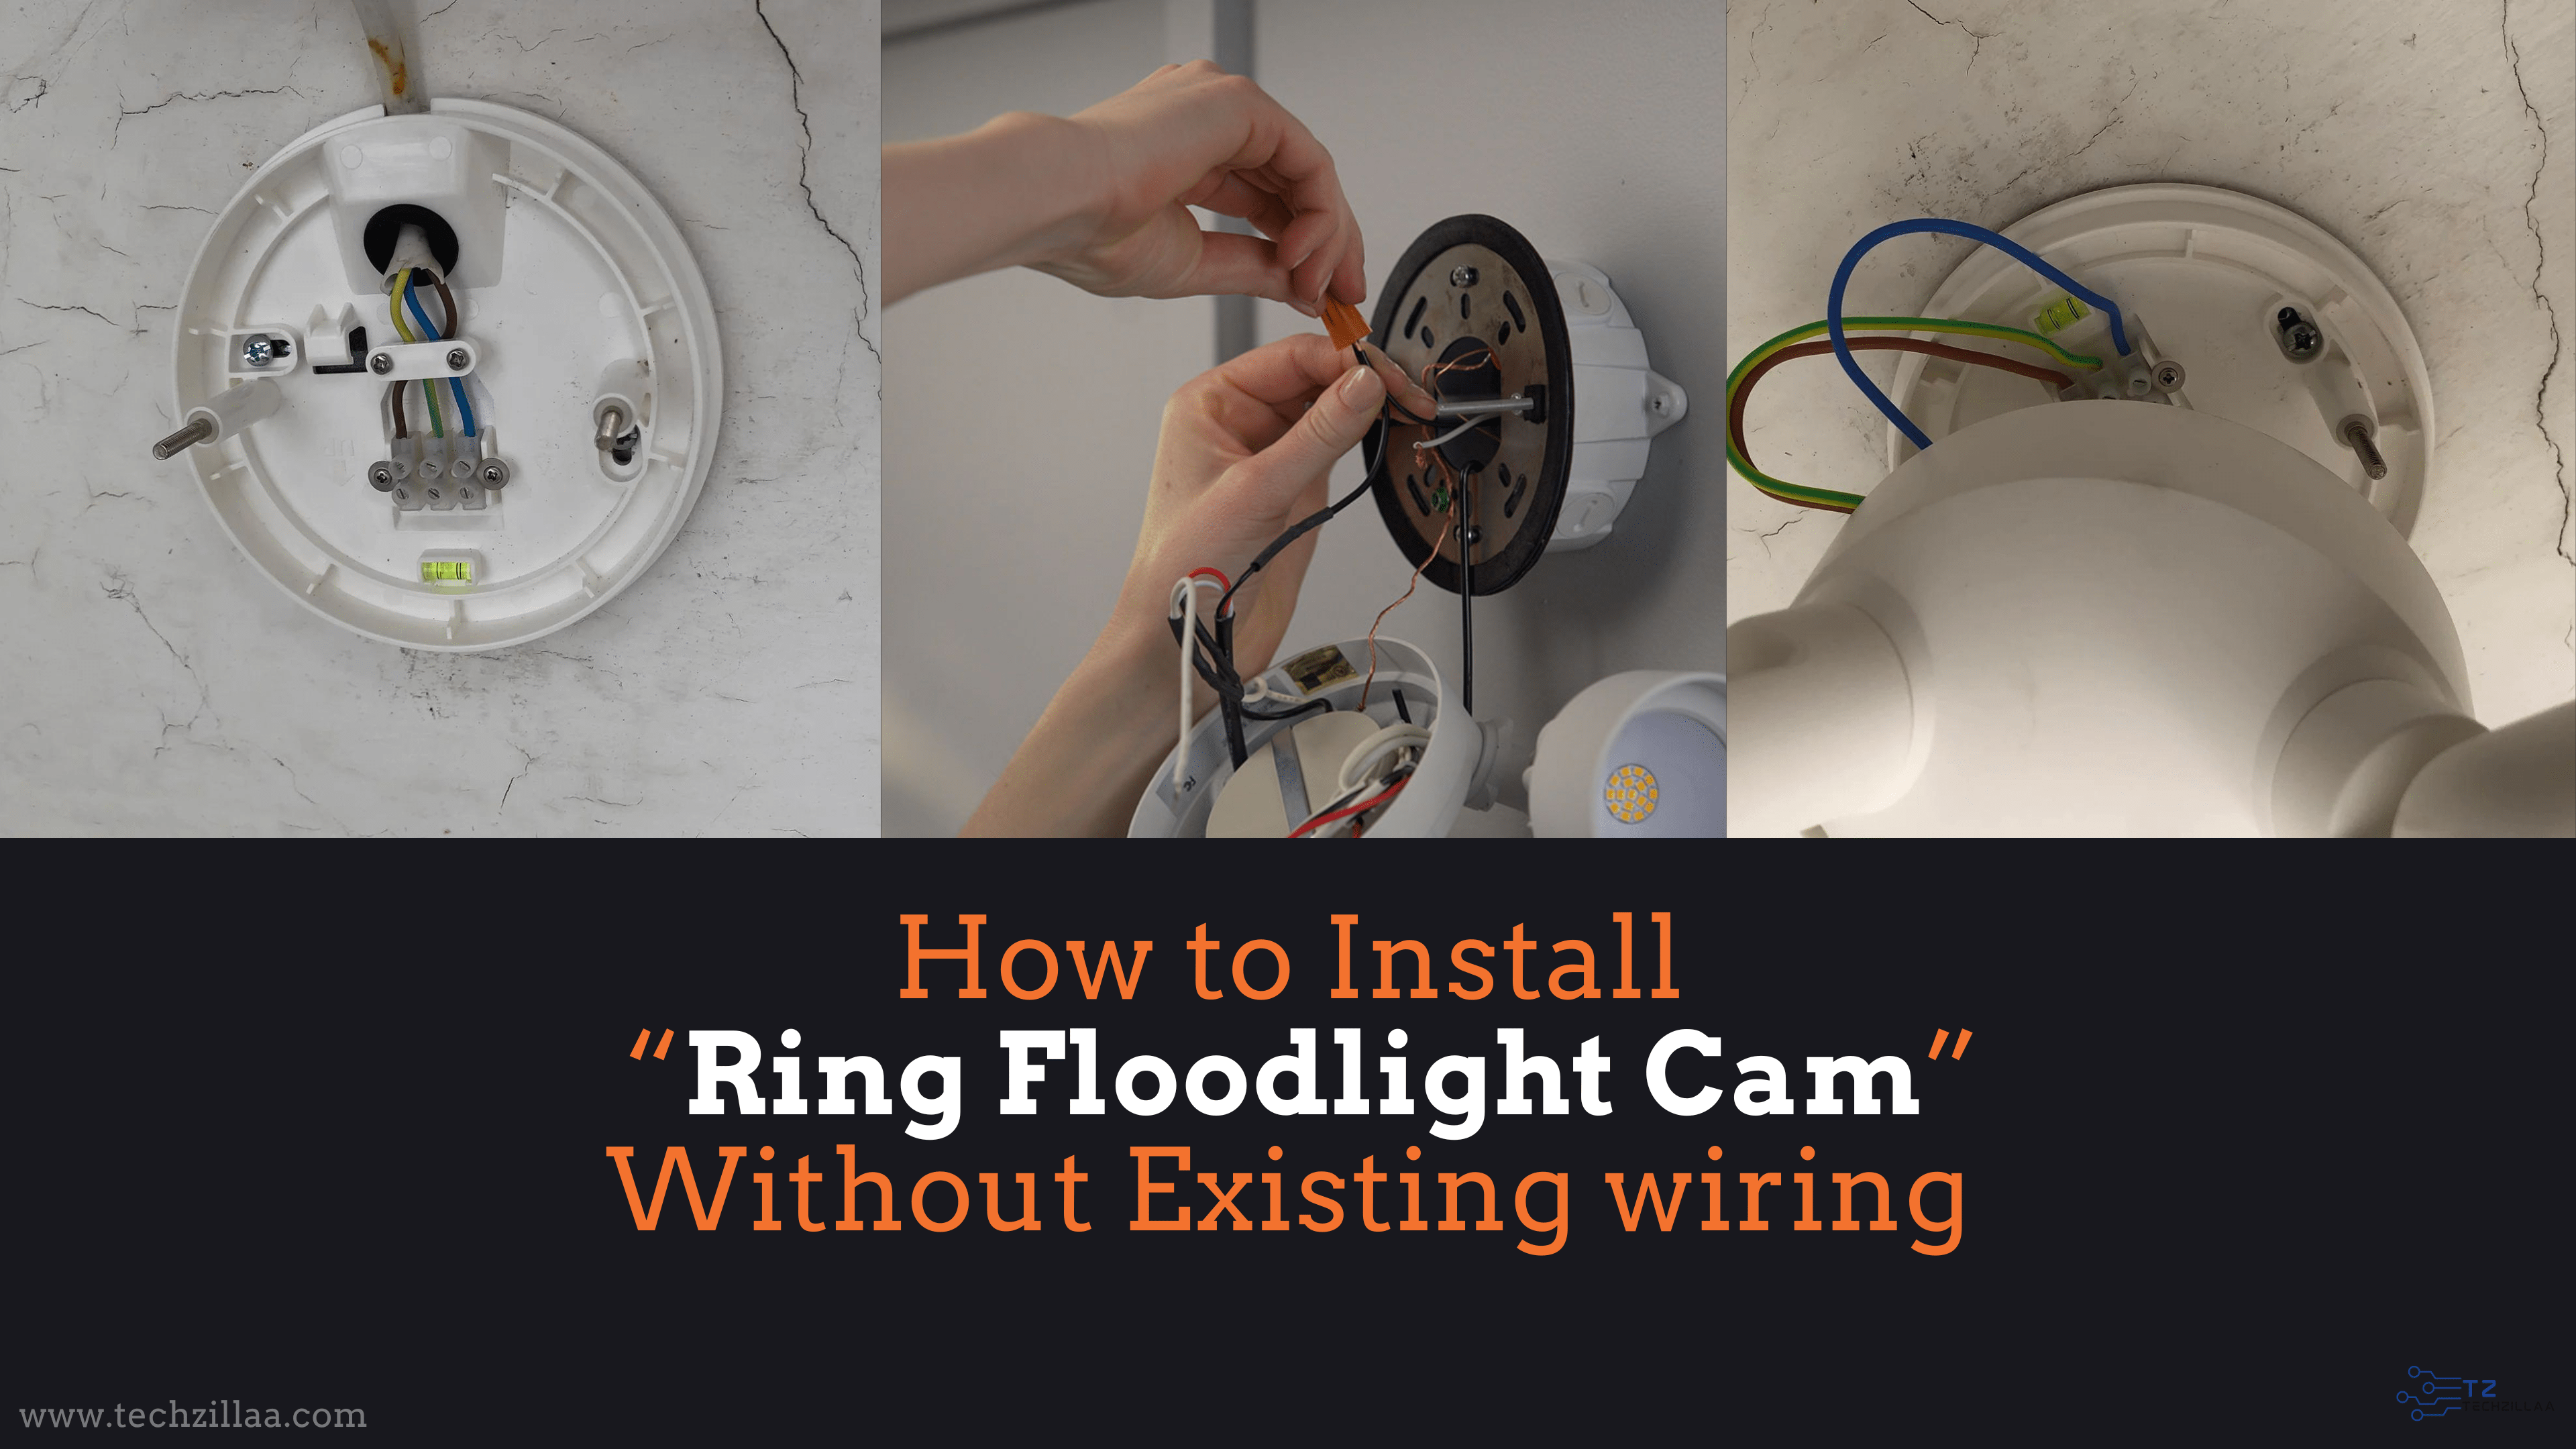 How to Install Ring Floodlight Cam Without Existing Wiring: A Step-by-Step Guide for Beginners